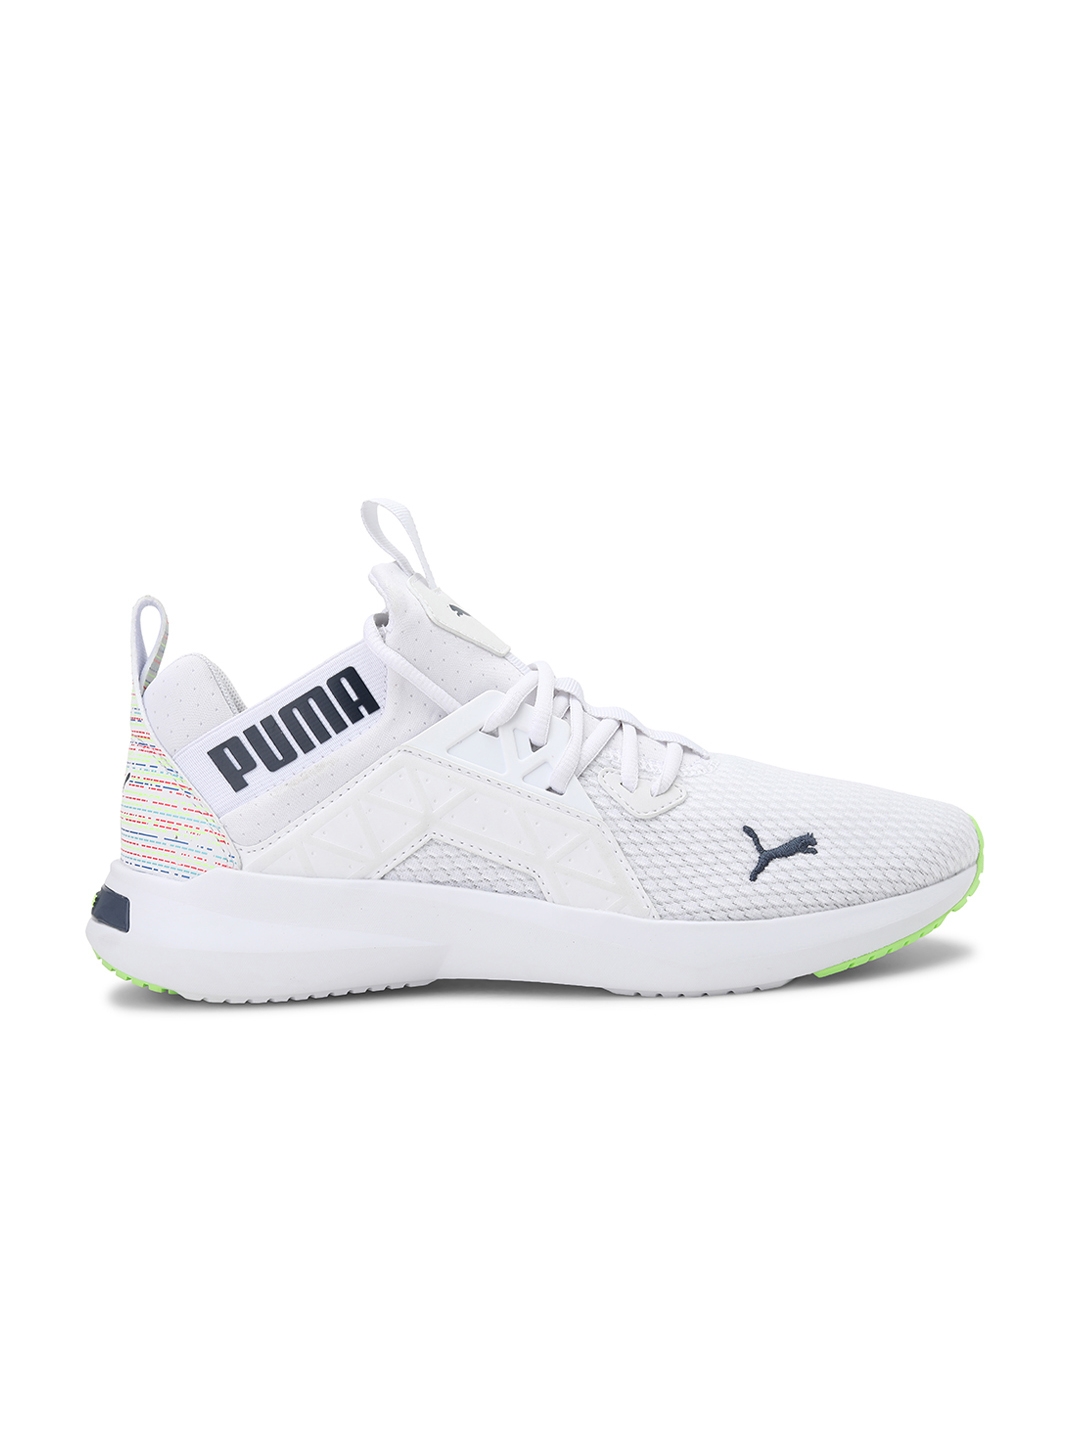 Puma | SOFTRIDE Enzo NXT Spectra Unisex Sneakers 2